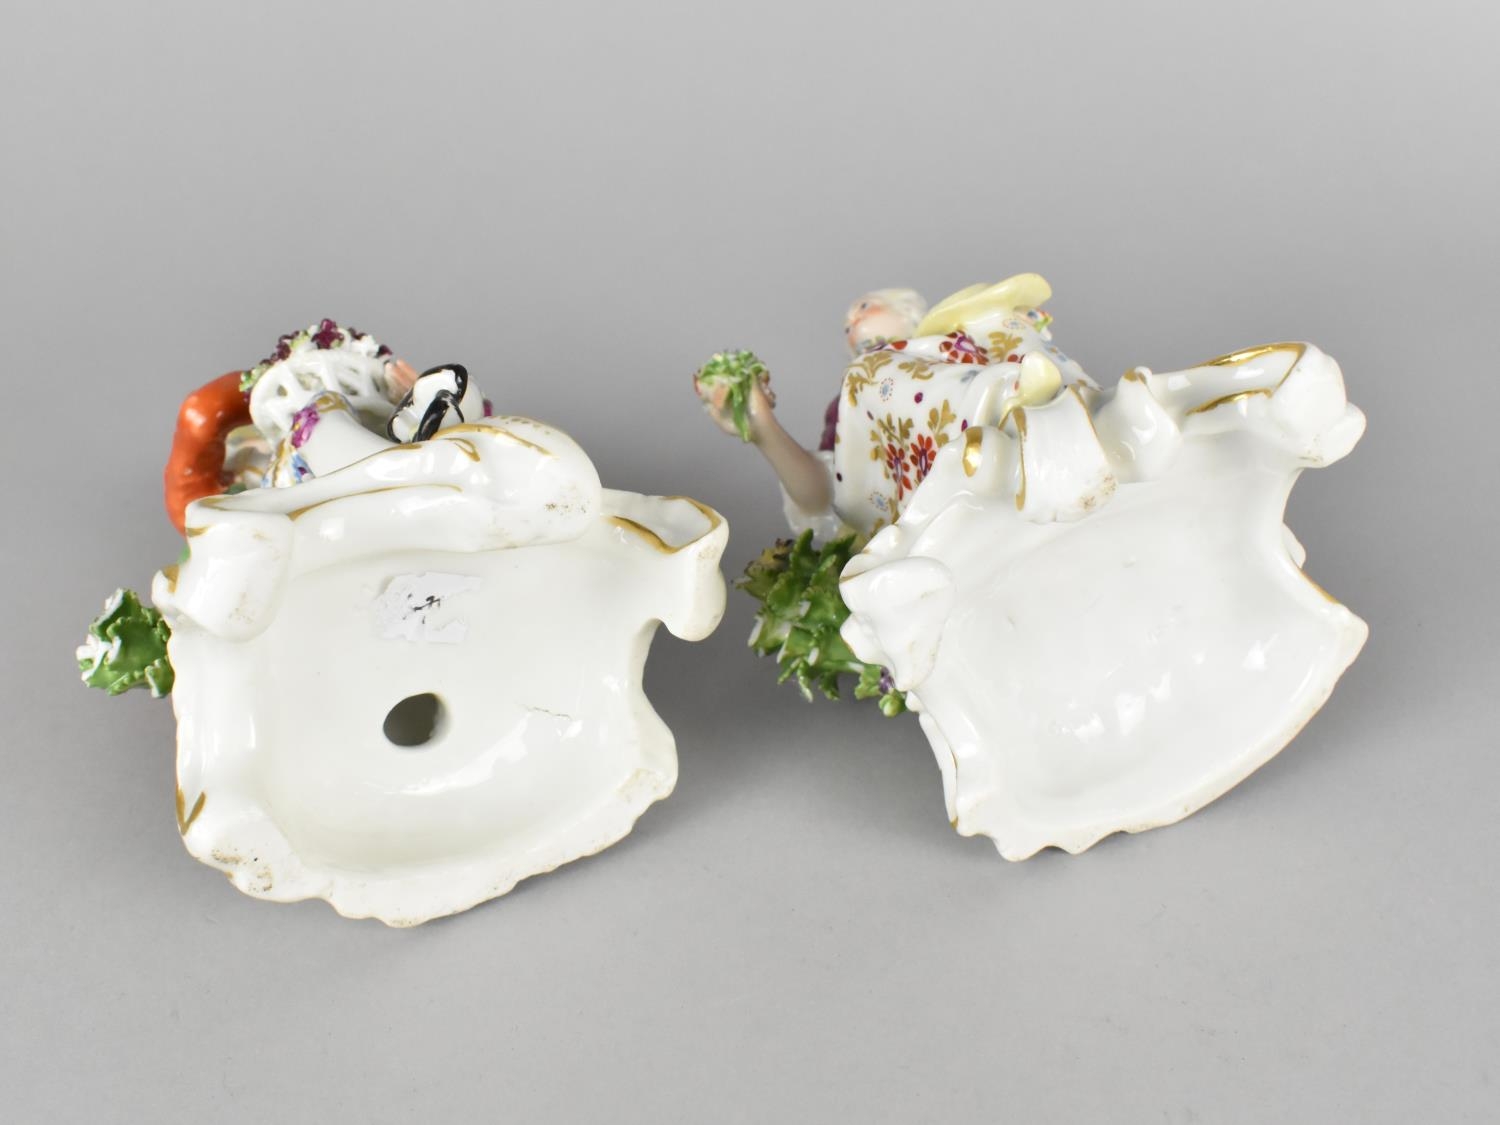 A Near Pair of Continental Porcelain Figures Modelled as Dandy and Lady with Flowers, 17cm high - Image 2 of 2